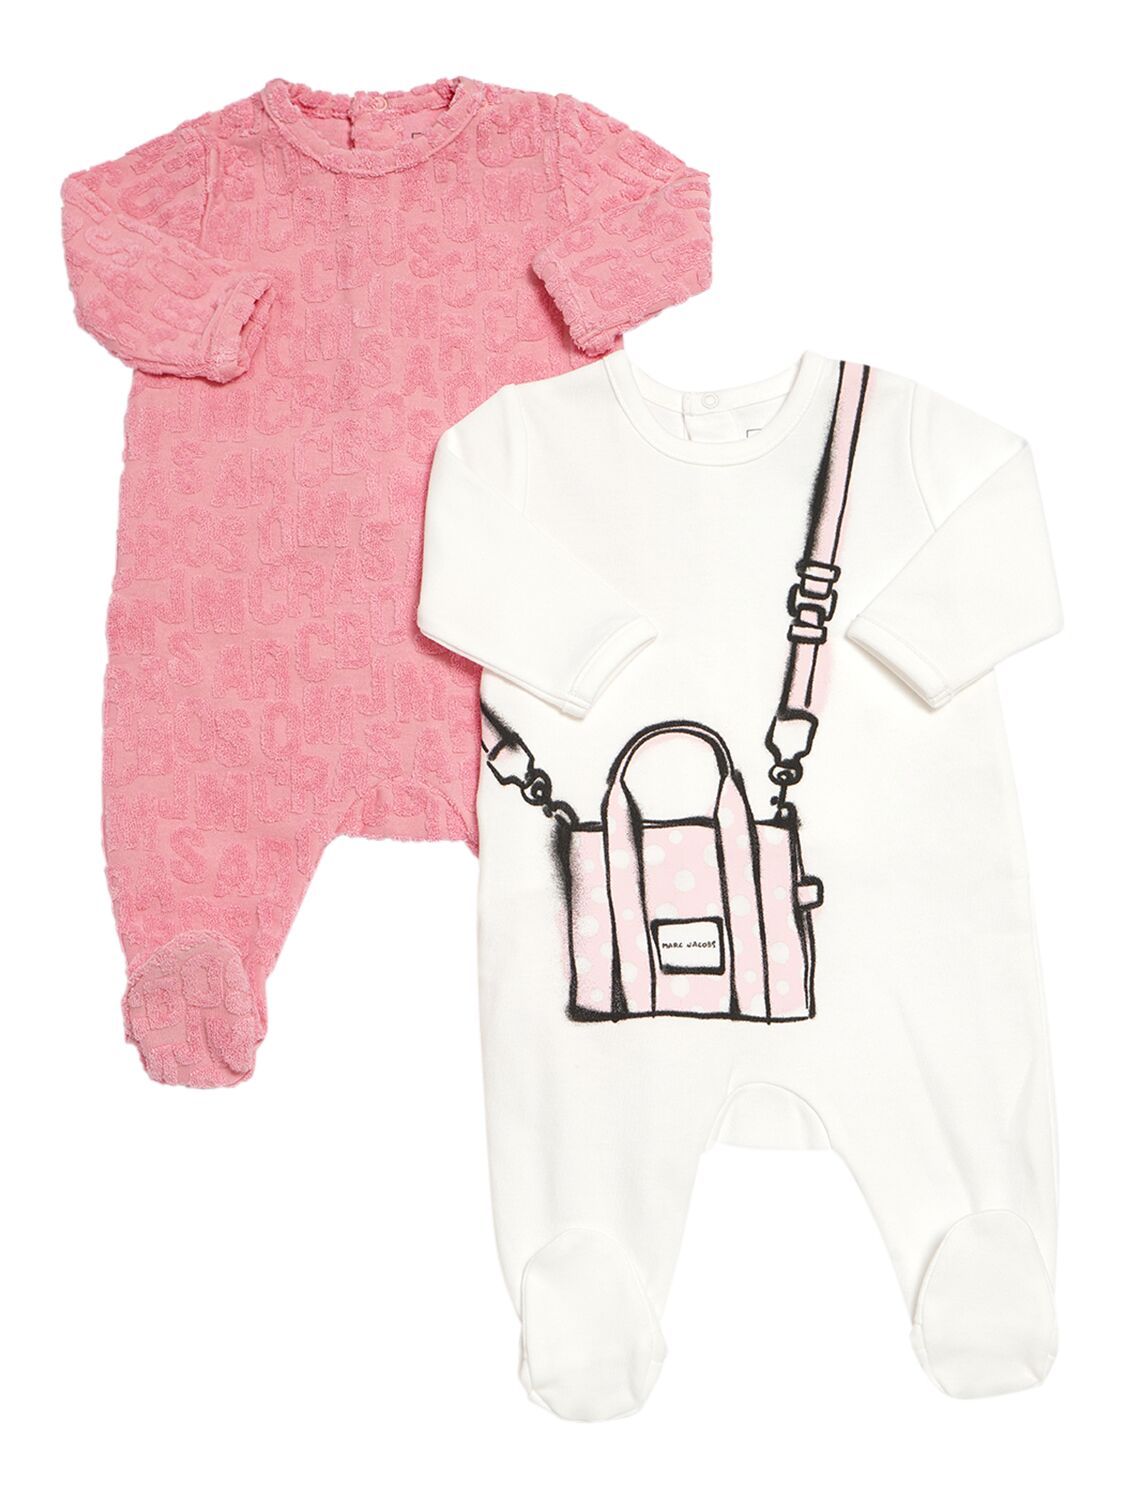 Marc Jacobs Babies' Set Of 2 Cotton Blend Rompers In Pink